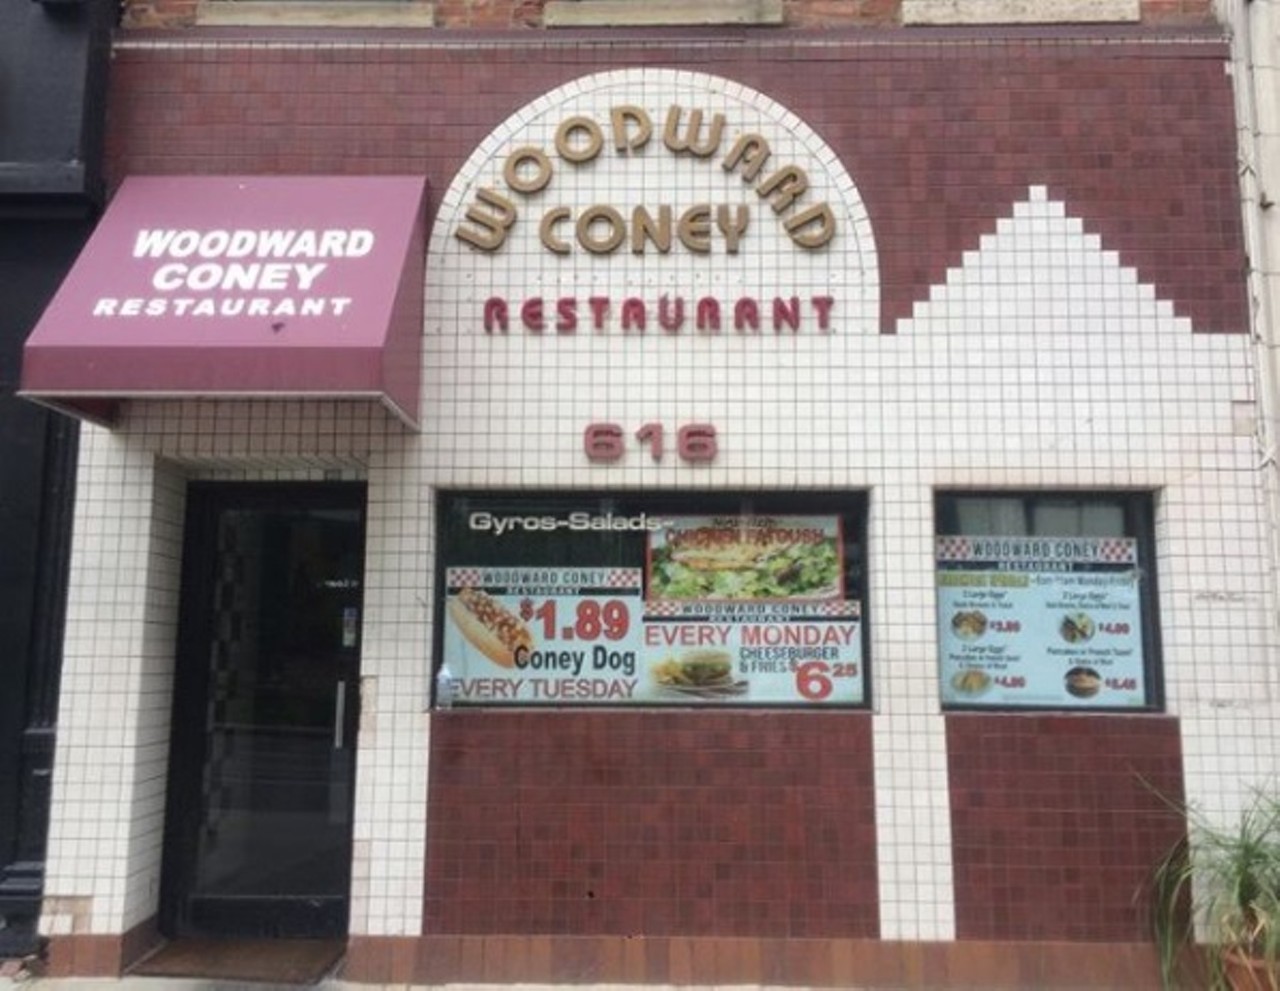 23. Woodward Coney Island
616 Woodward Ave., Detroit
Circle back for seconds at this love it or hate it family-owned coney near Campus Martius.
Photo with permission from Paulina V. Alstrom / fka_paulina_paulina